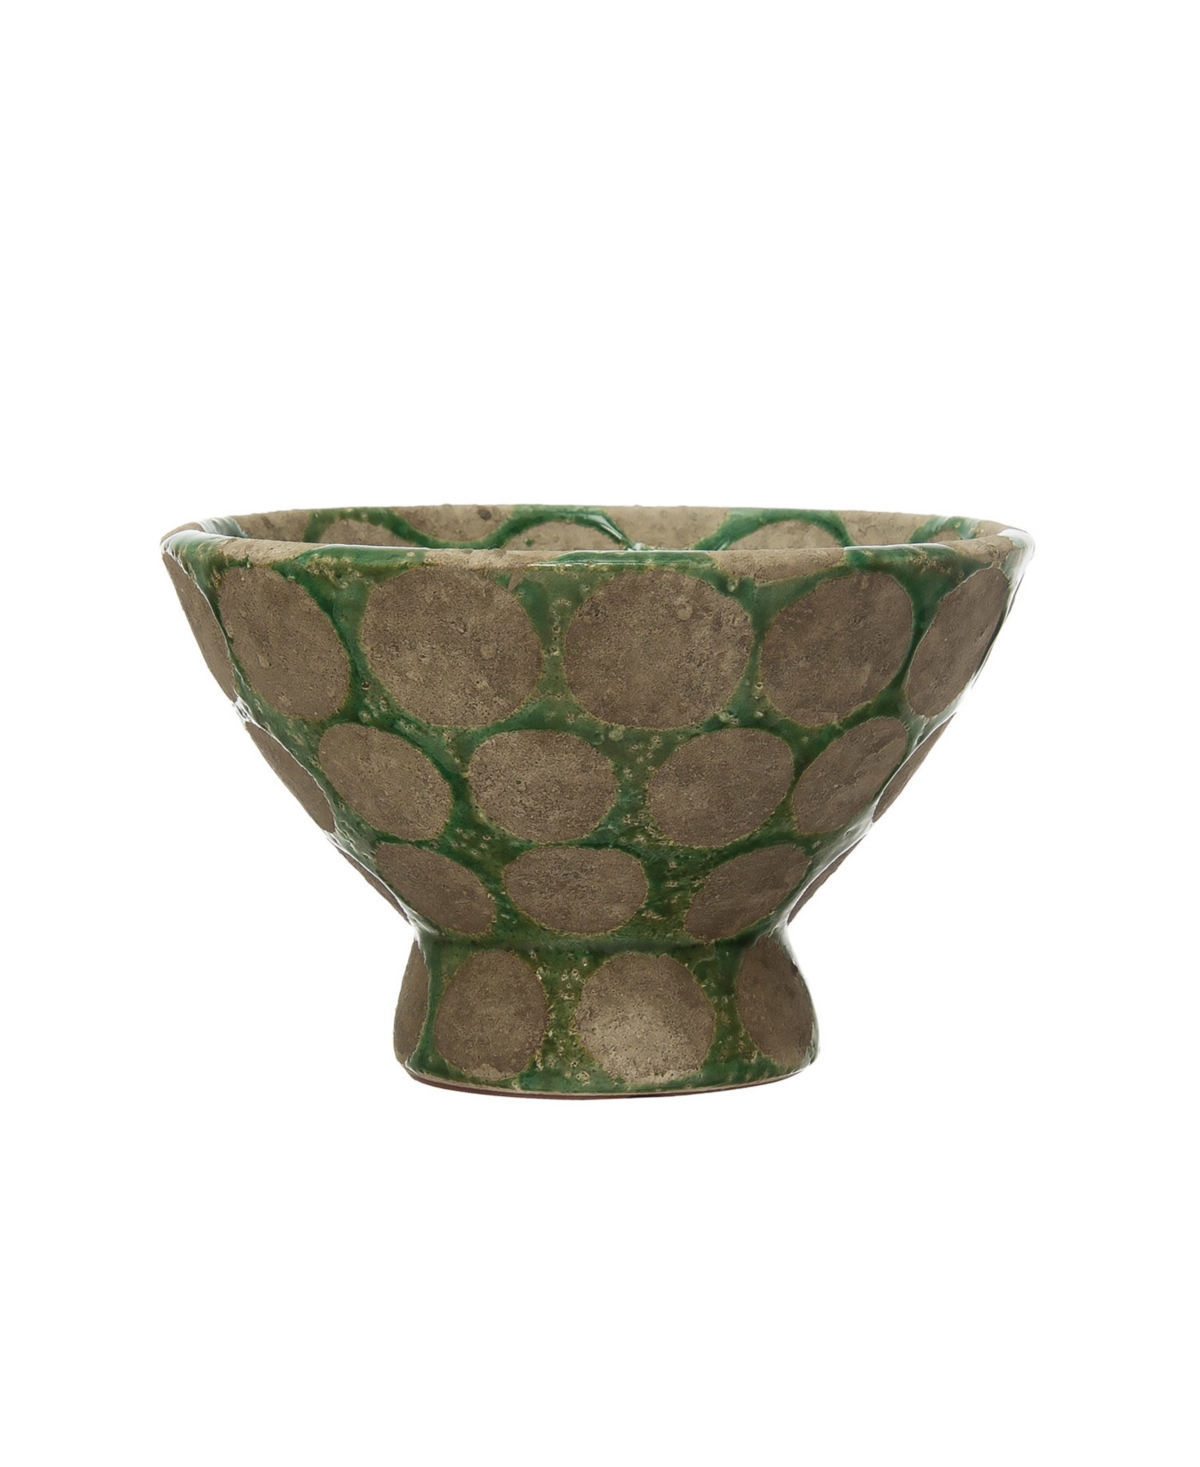 Terra-Cotta Footed Bowl with Wax Relief Dots - Multicolored